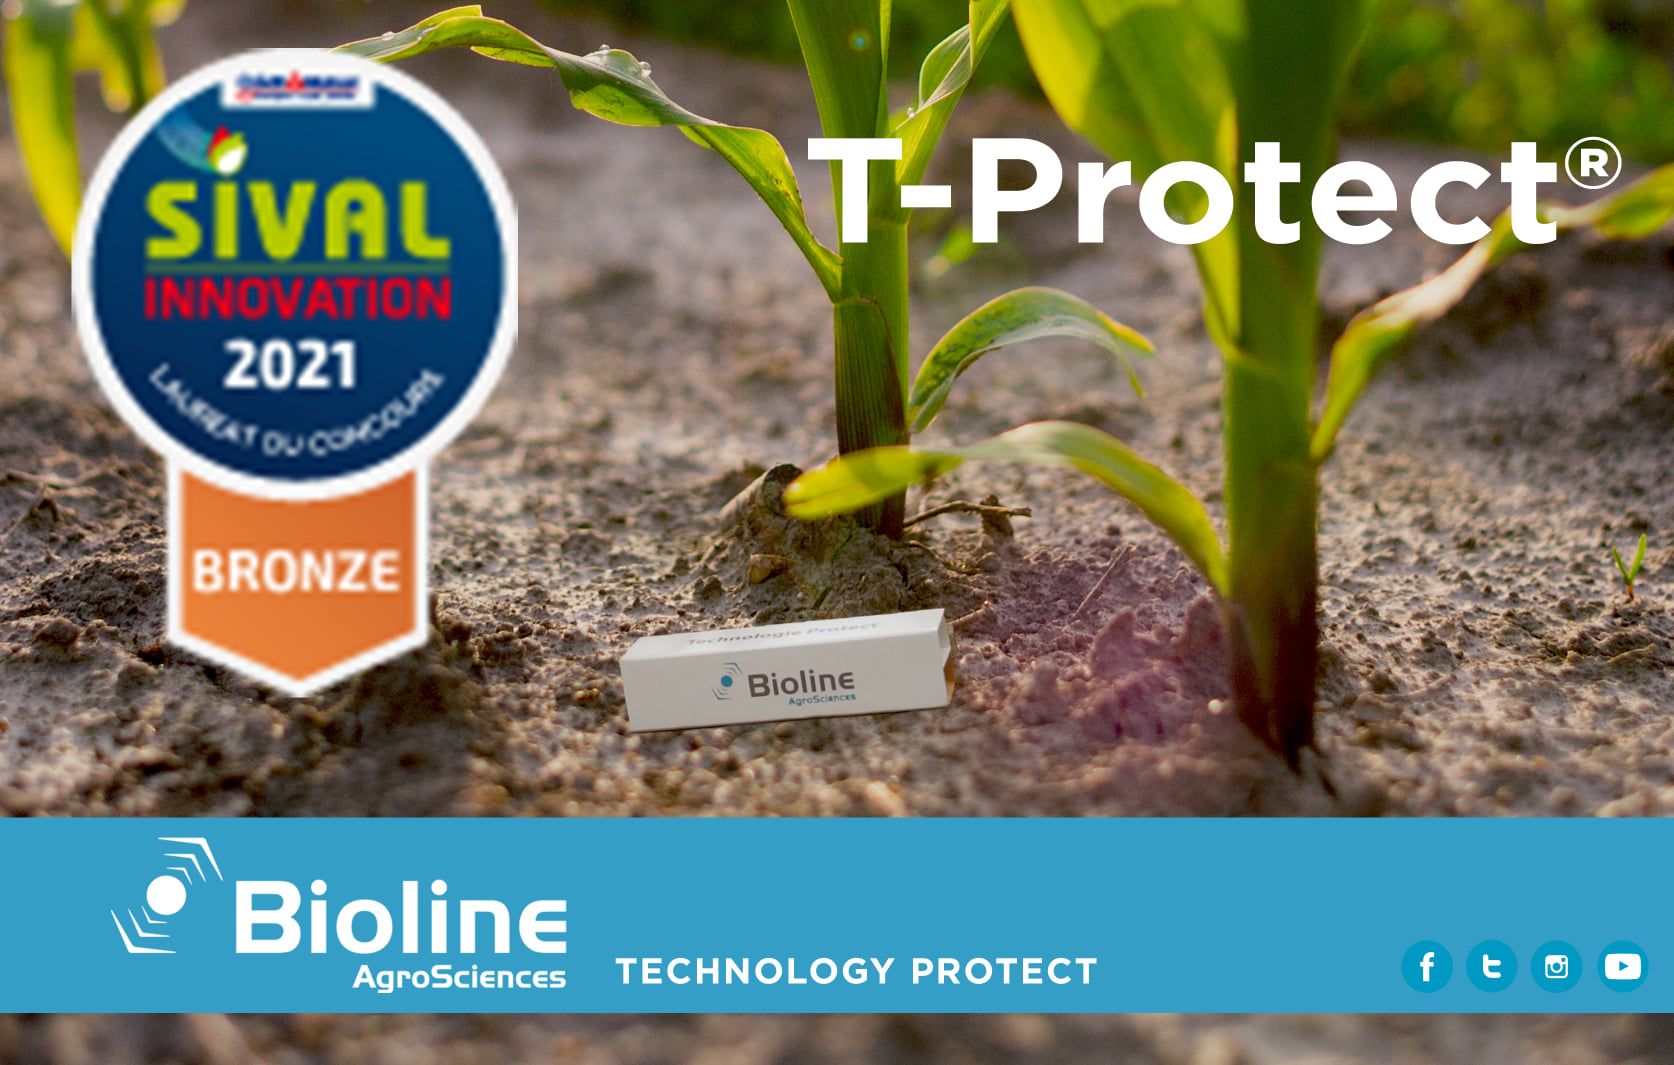 Bioline obtains bronze medal at SIVAL Innovation 2021 with T-PROTECT® © Bioline Agrosciences